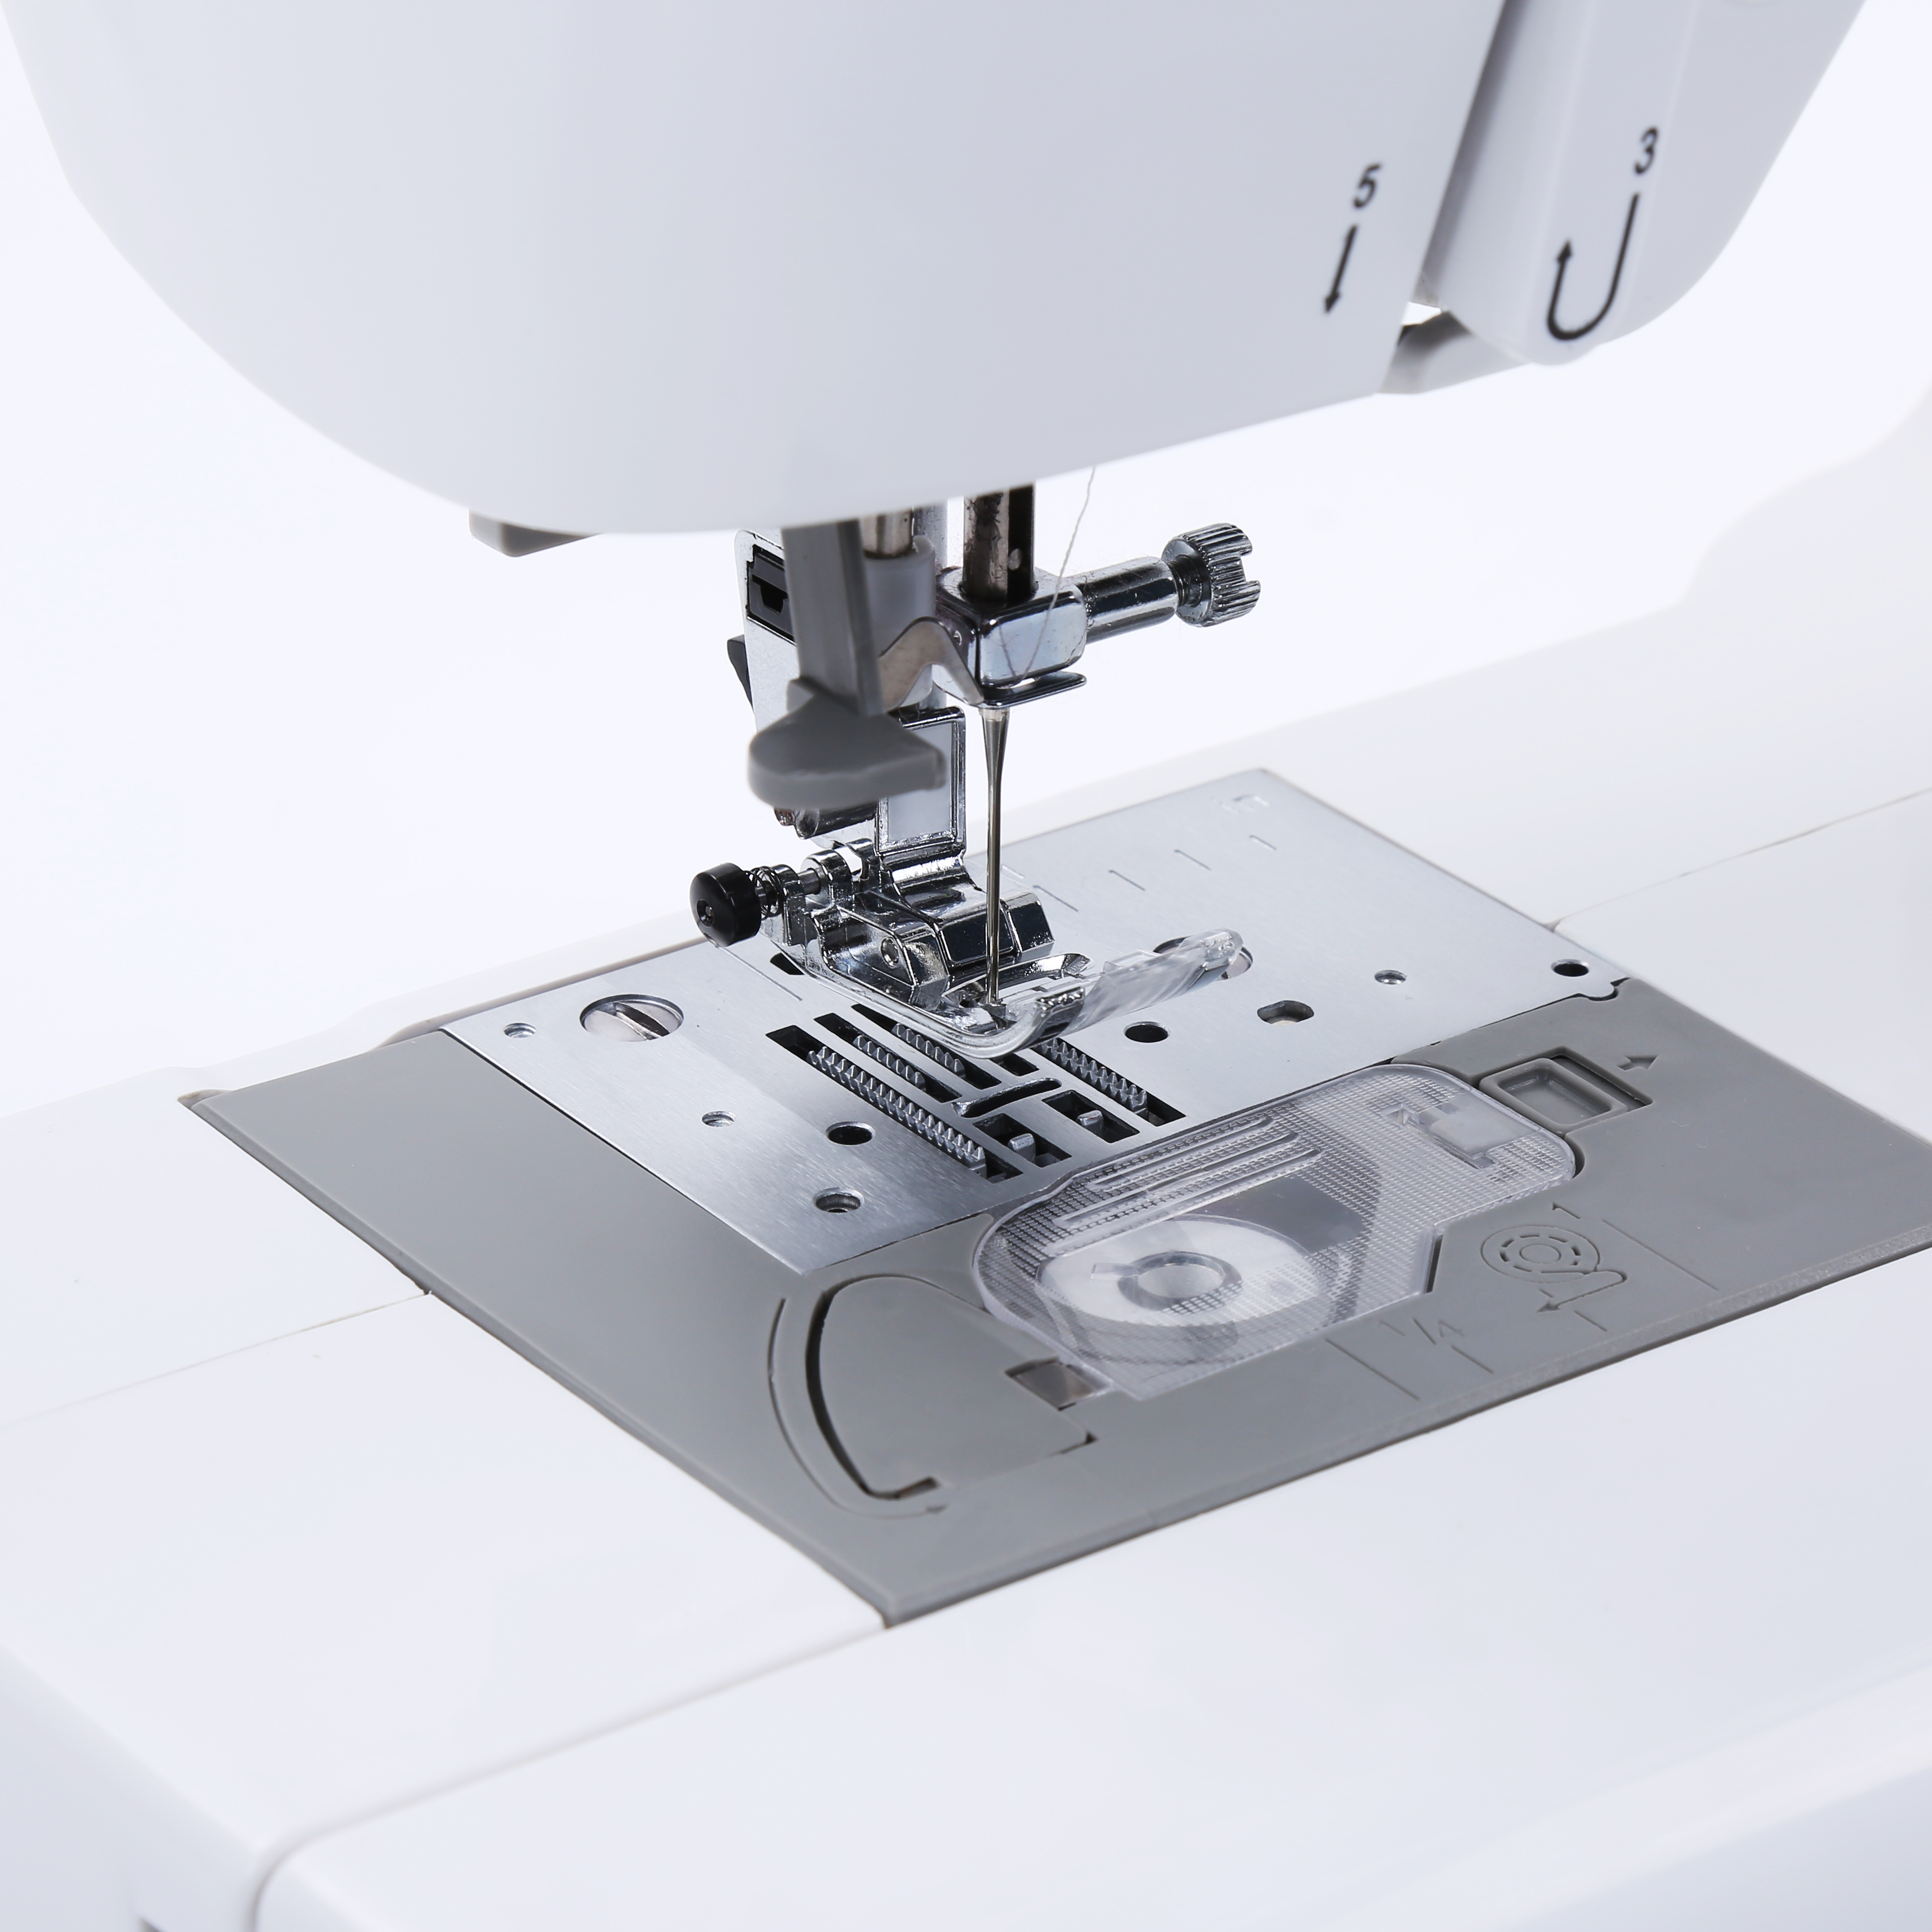 BAI Compound Feed Walking Foot Sewing Machines for Industial Sewing Machine